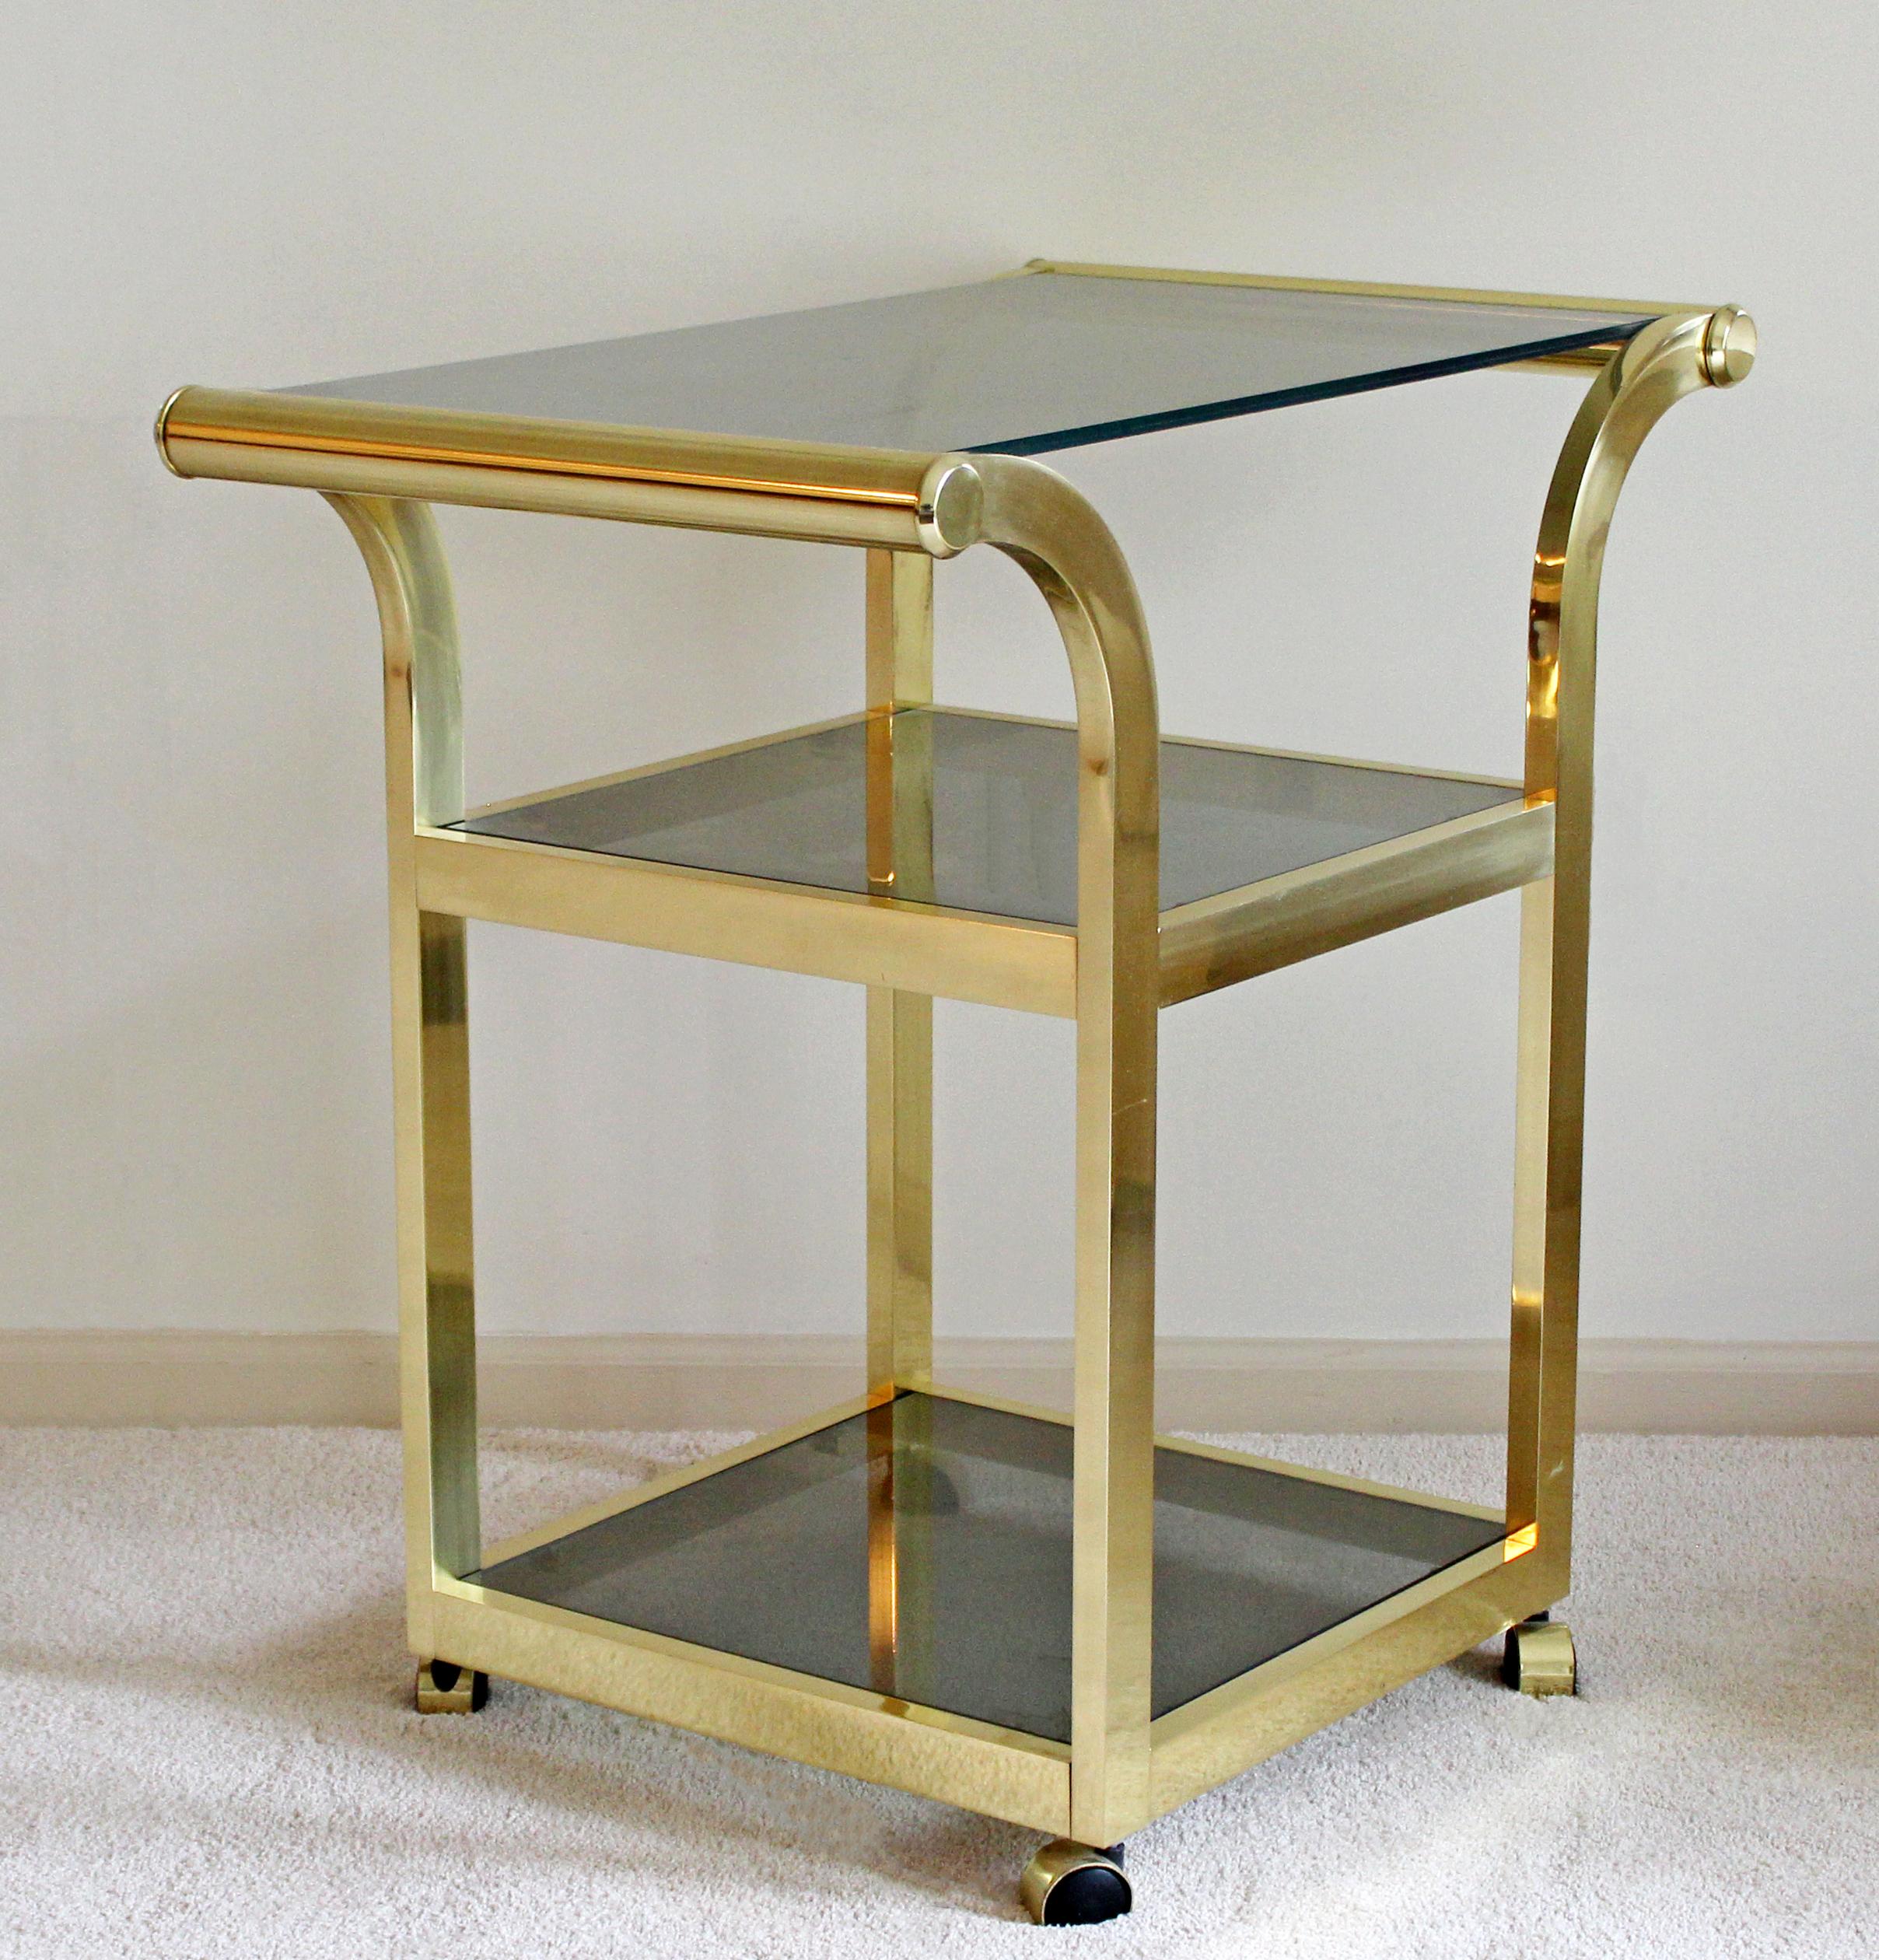 For your consideration is an incredibly sexy trolley cart, on wheels, made of brass and with three smoked glass shelves, circa the 1970s. Attributed to Milo Baughman. In very good vintage condition. The dimensions are 30